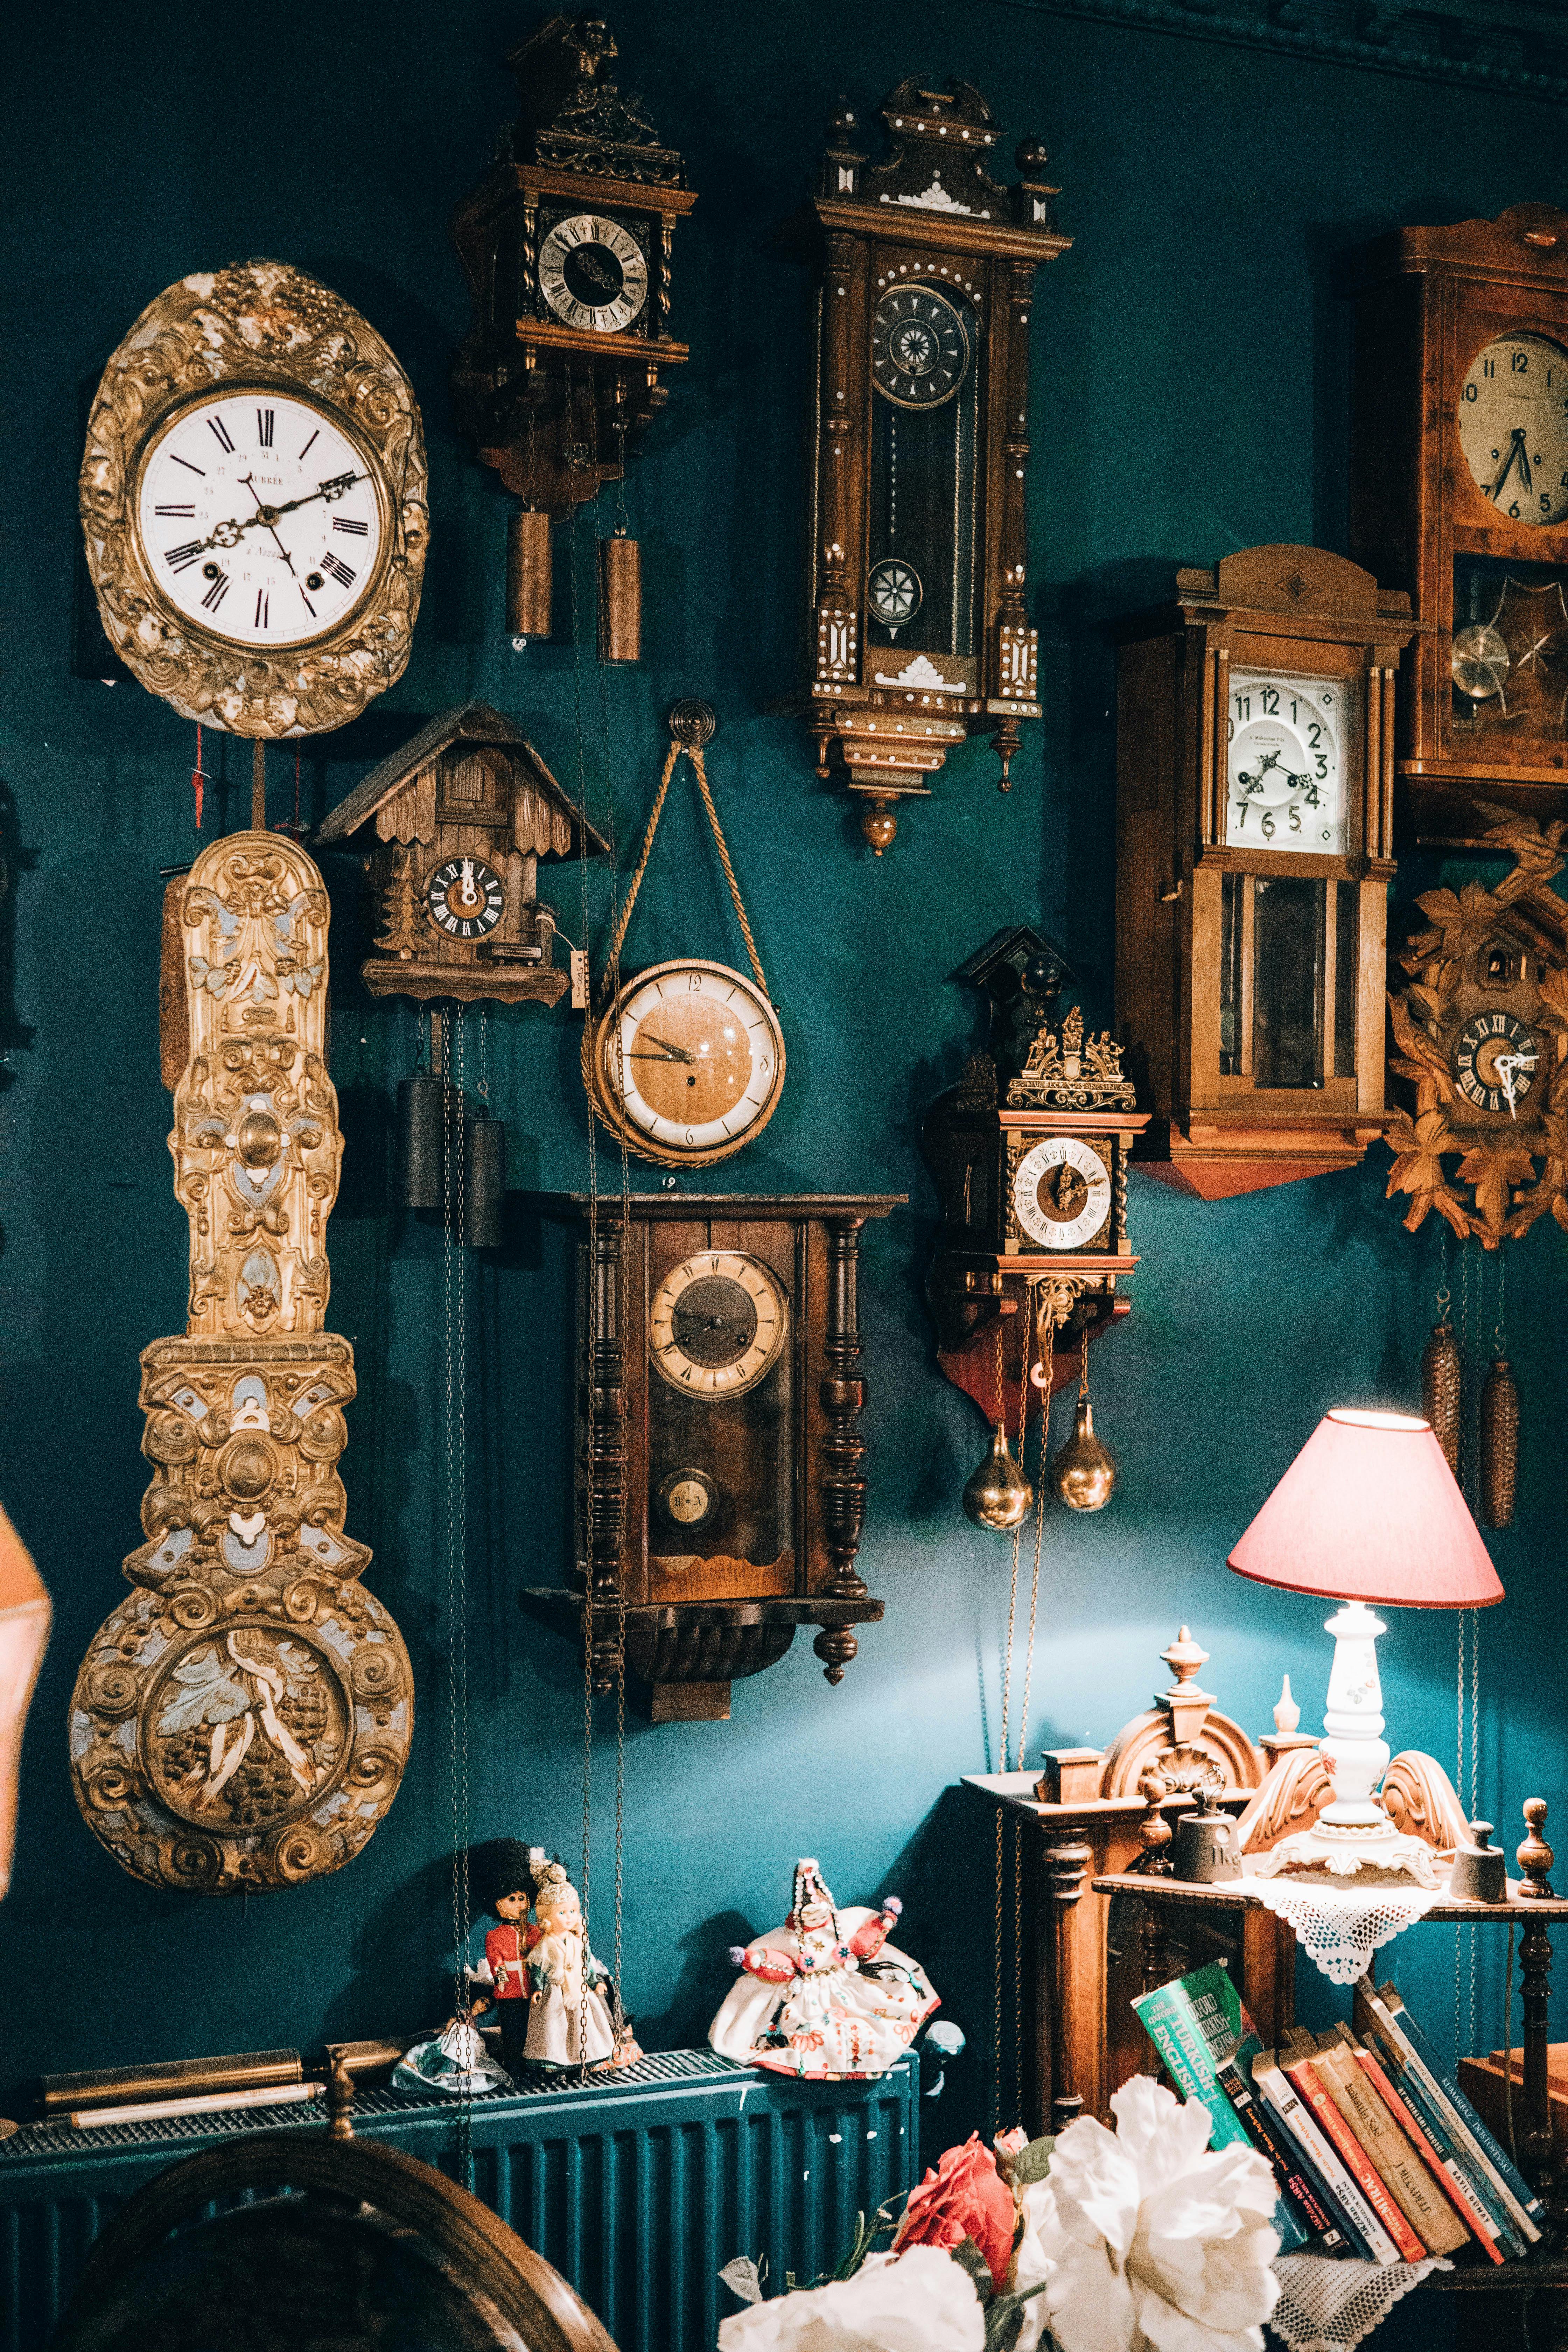 Antique Clocks Hanging on Wall · Free Stock Photo